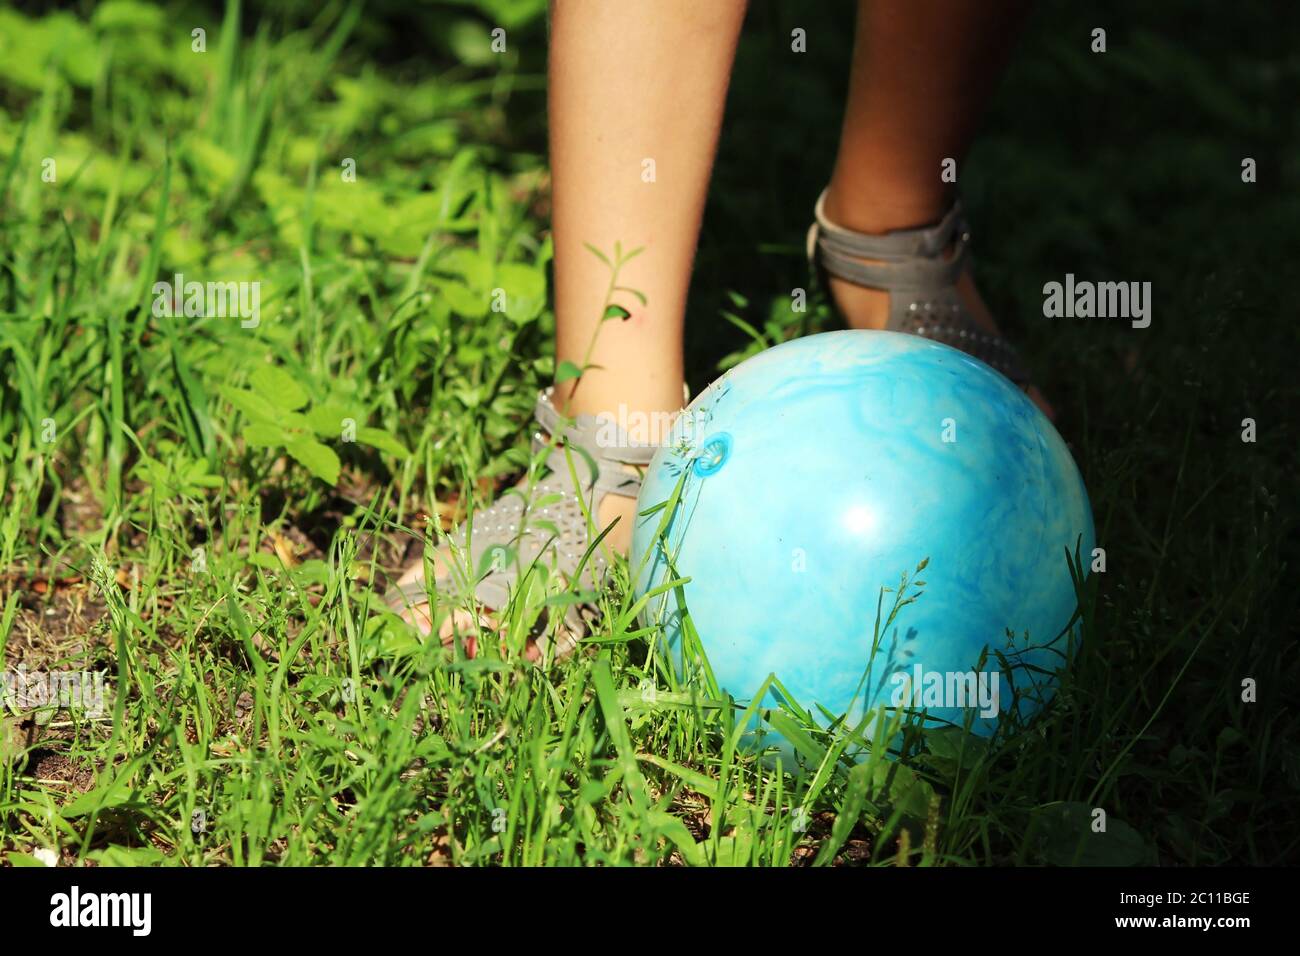 teen girl in sandals kicking a blue ball in the park on the grass. Stock Photo